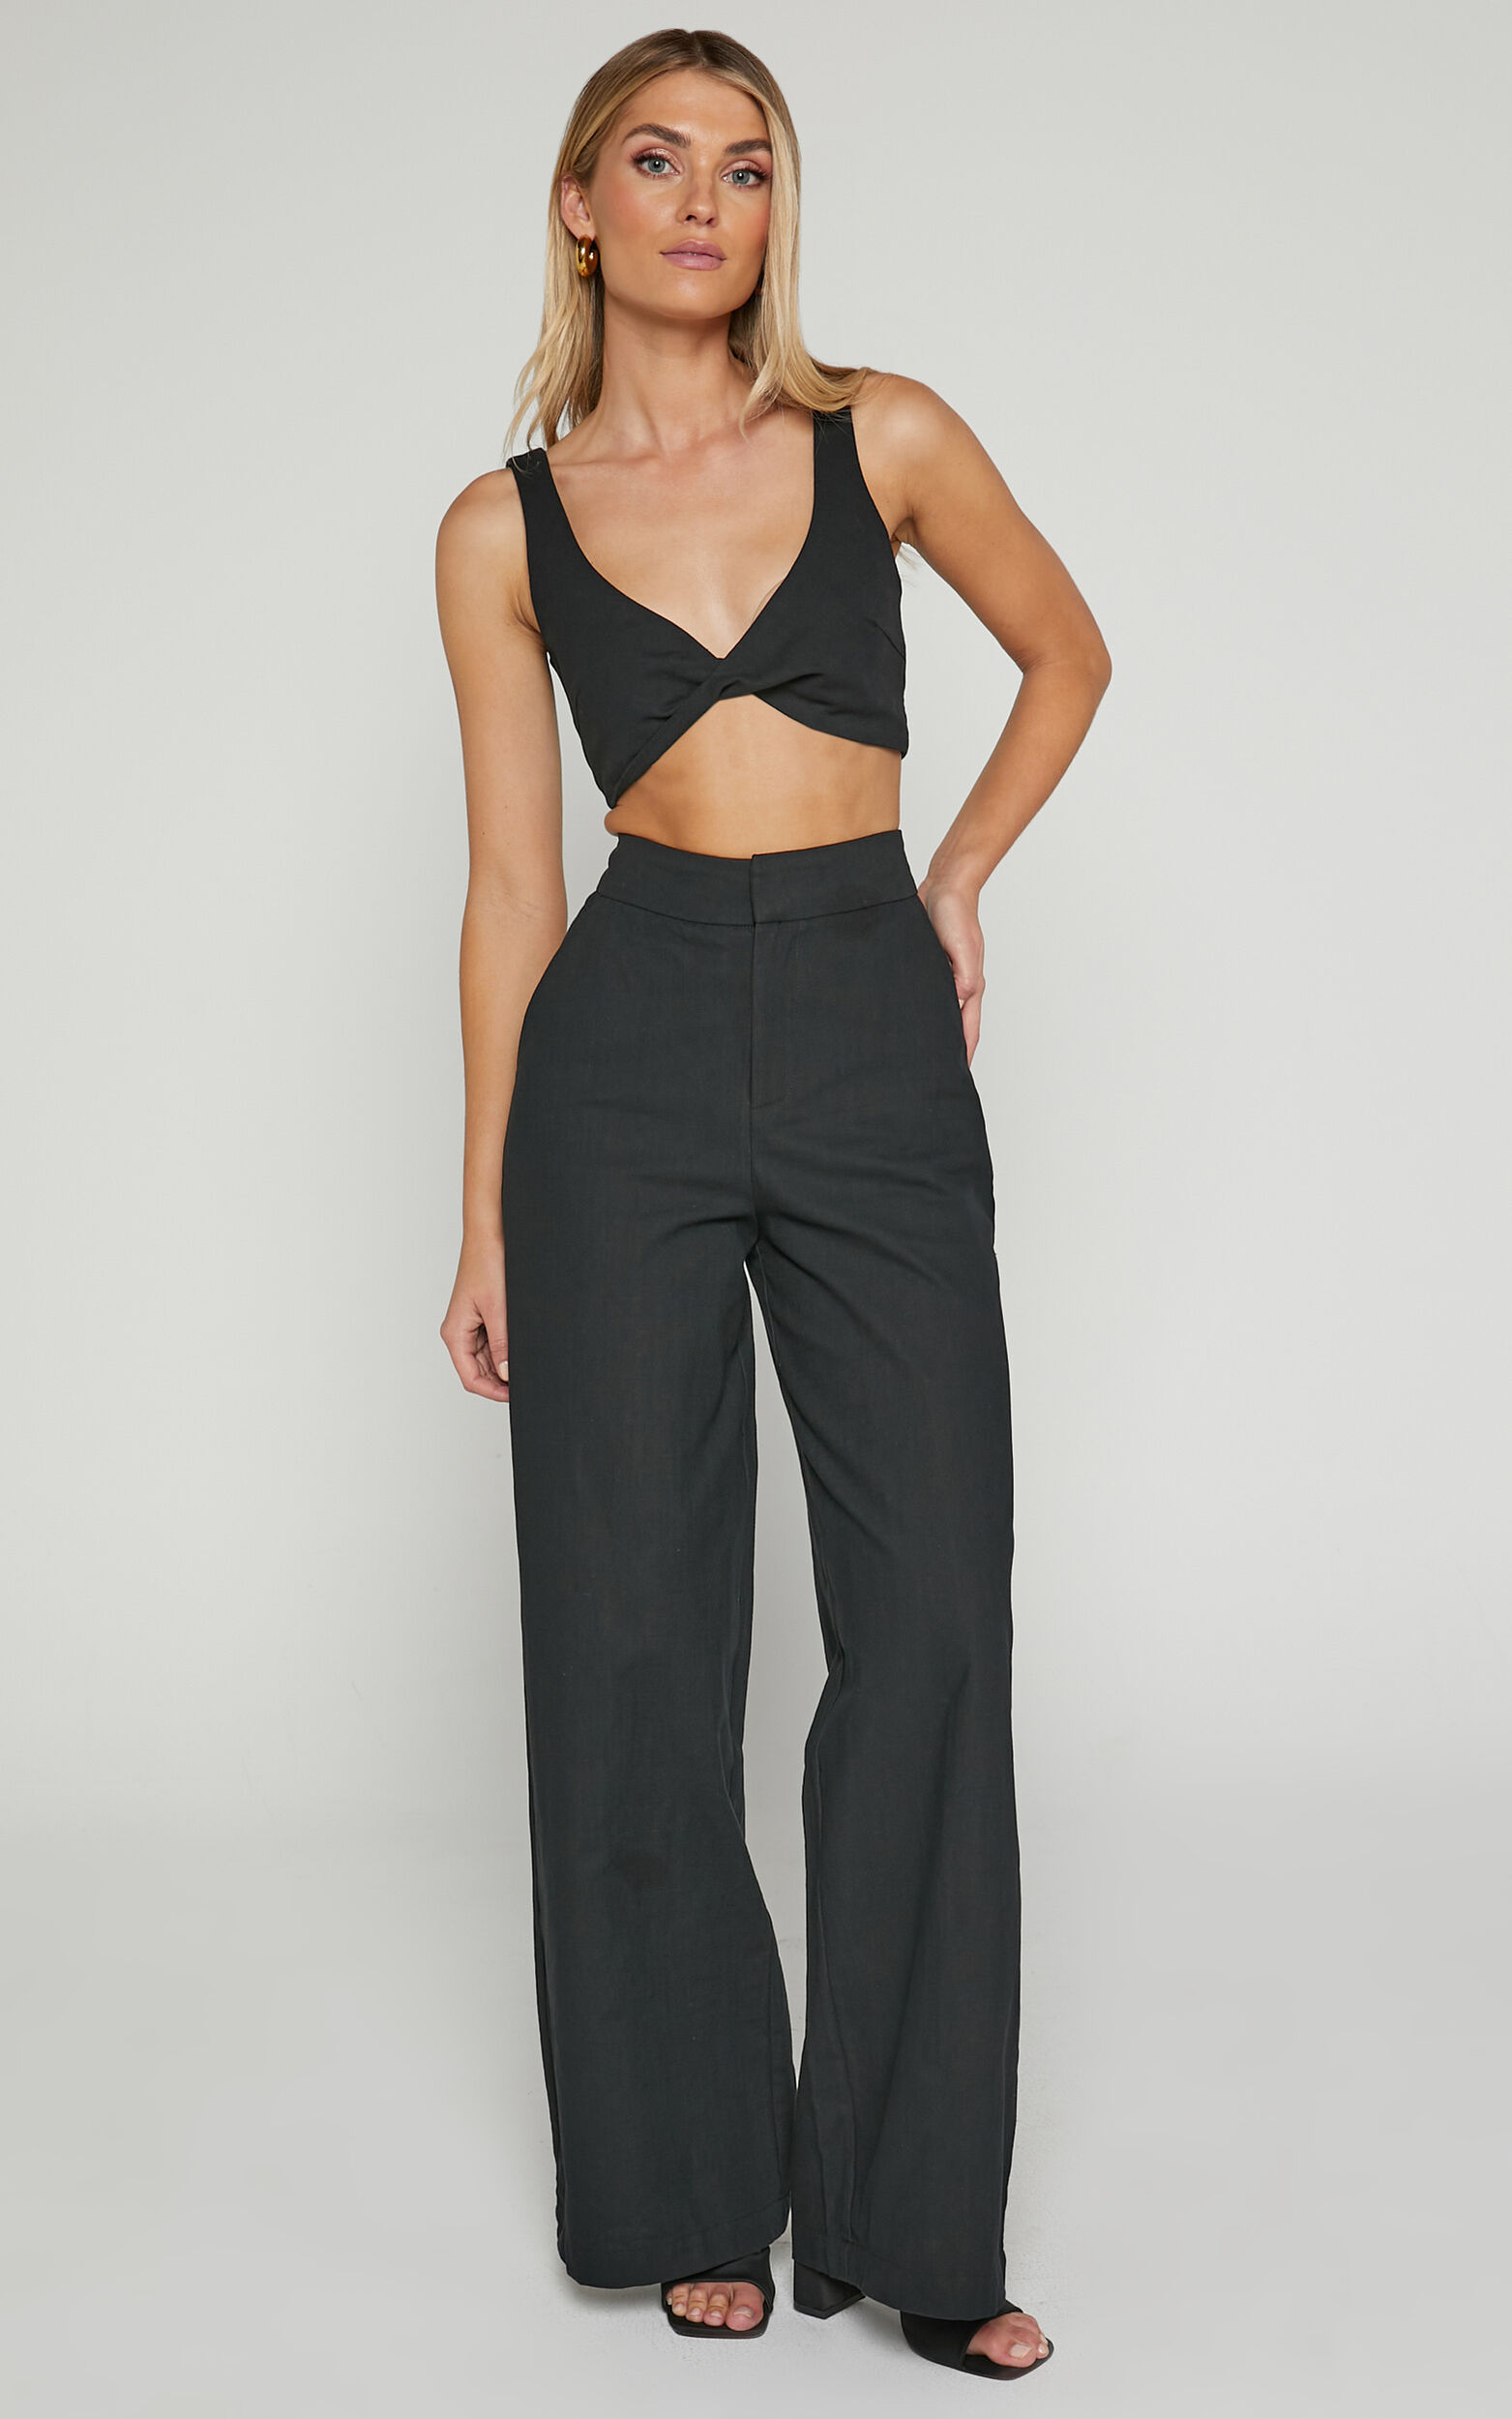 Kingston Two Piece Set - Twist Front Twill and Wide Leg Pants Set in Black - 06, BLK1